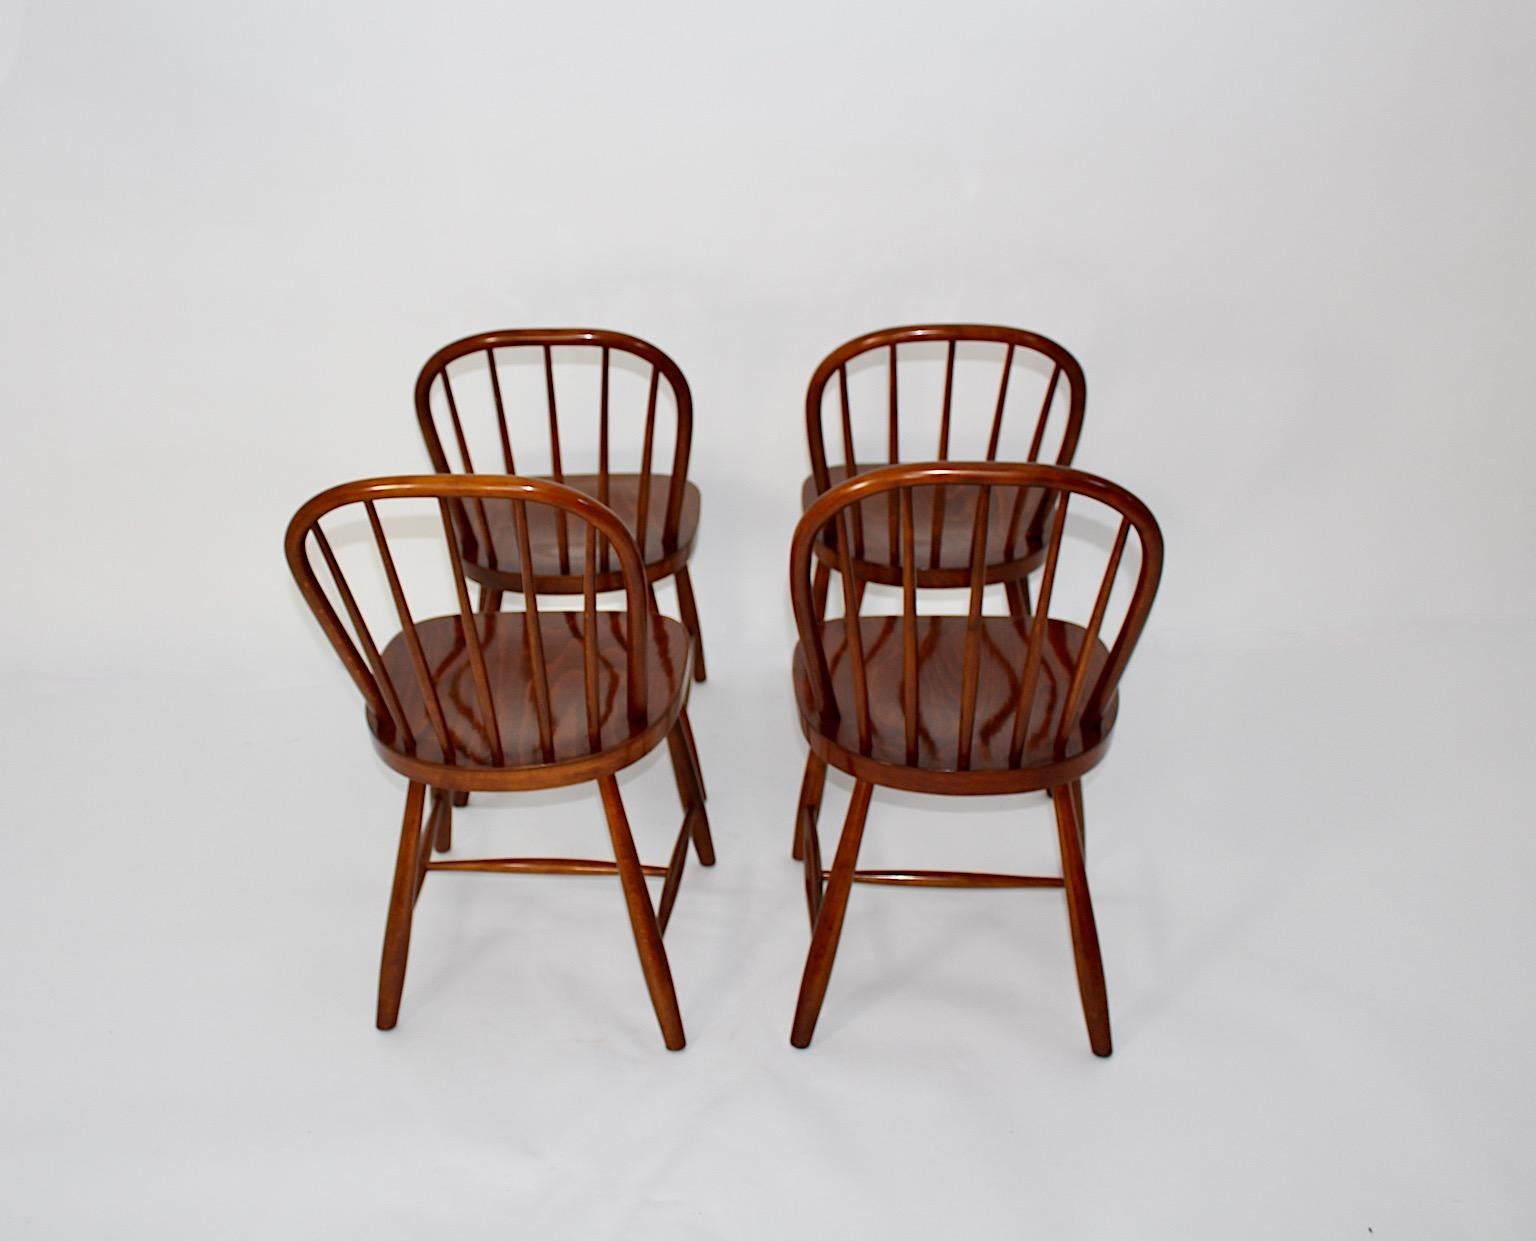 Art Deco Vintage Beech Windsor Dining Room Chairs Four Josef Frank 1920s Vienna For Sale 9